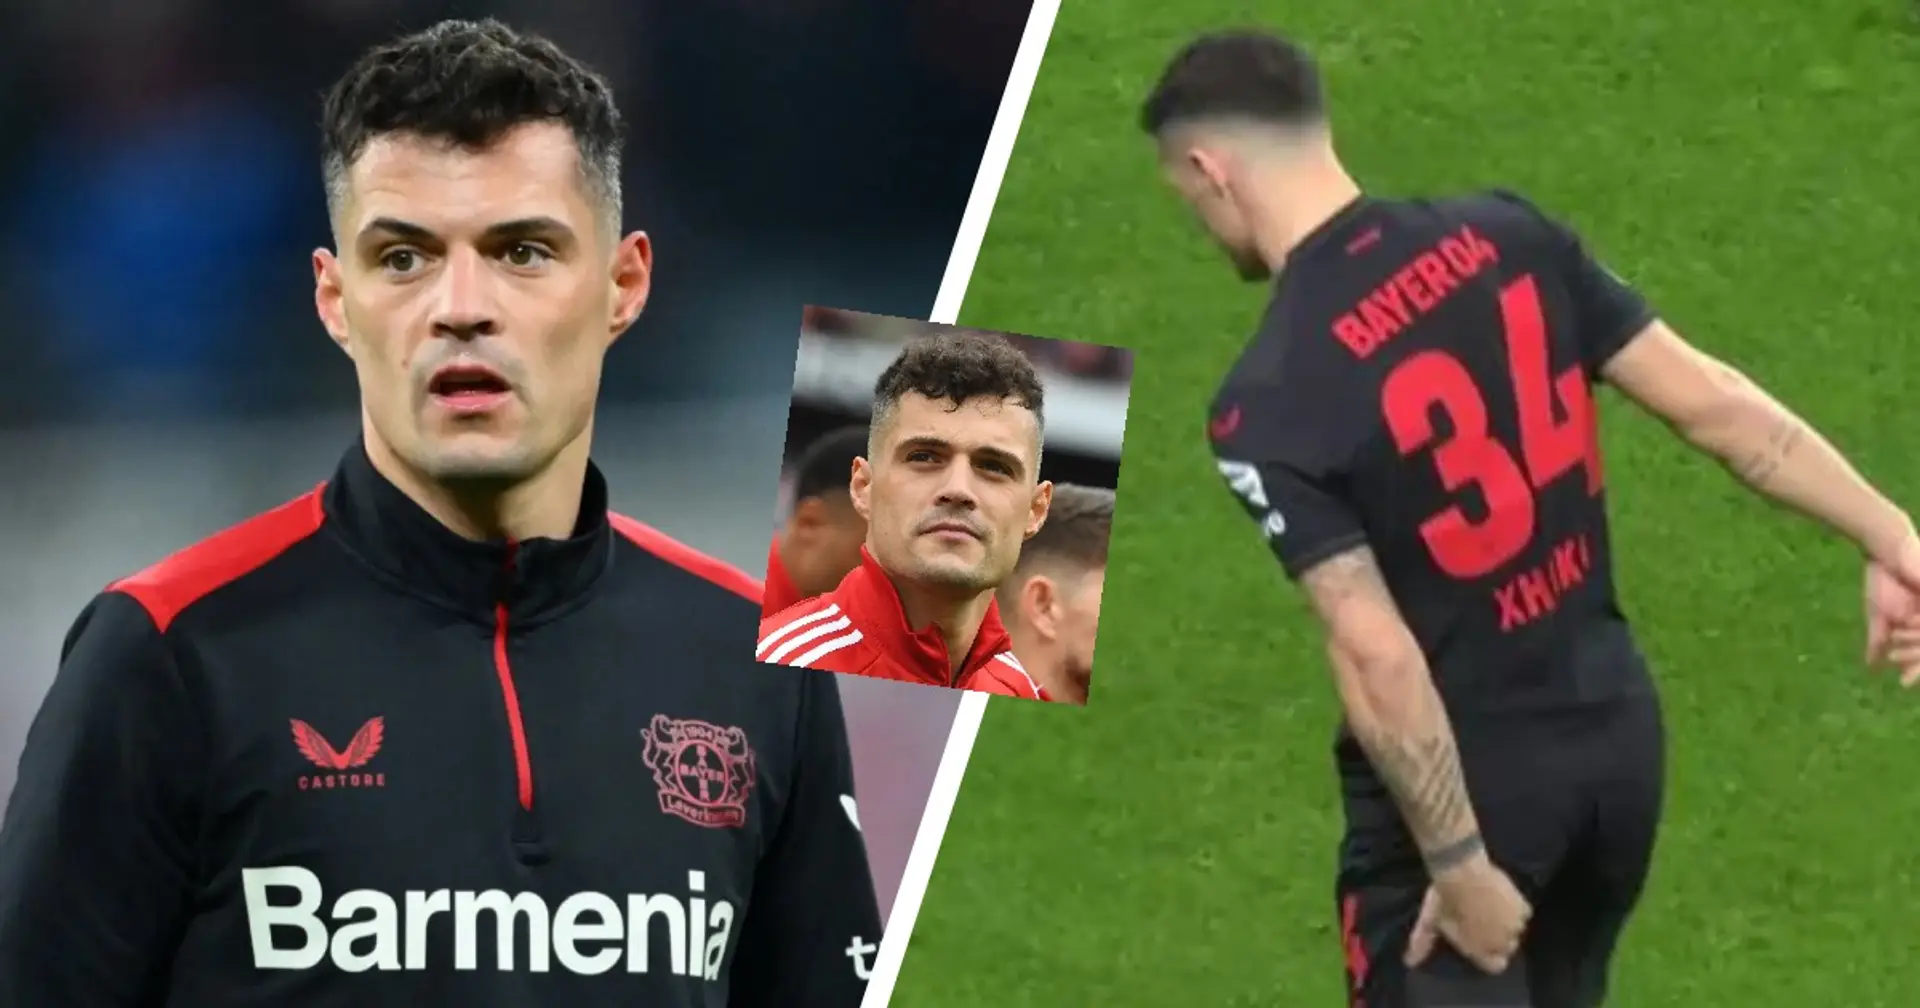 'I was accused of taking a step backwards': Xhaka hits back at critics after first Leverkusen goal